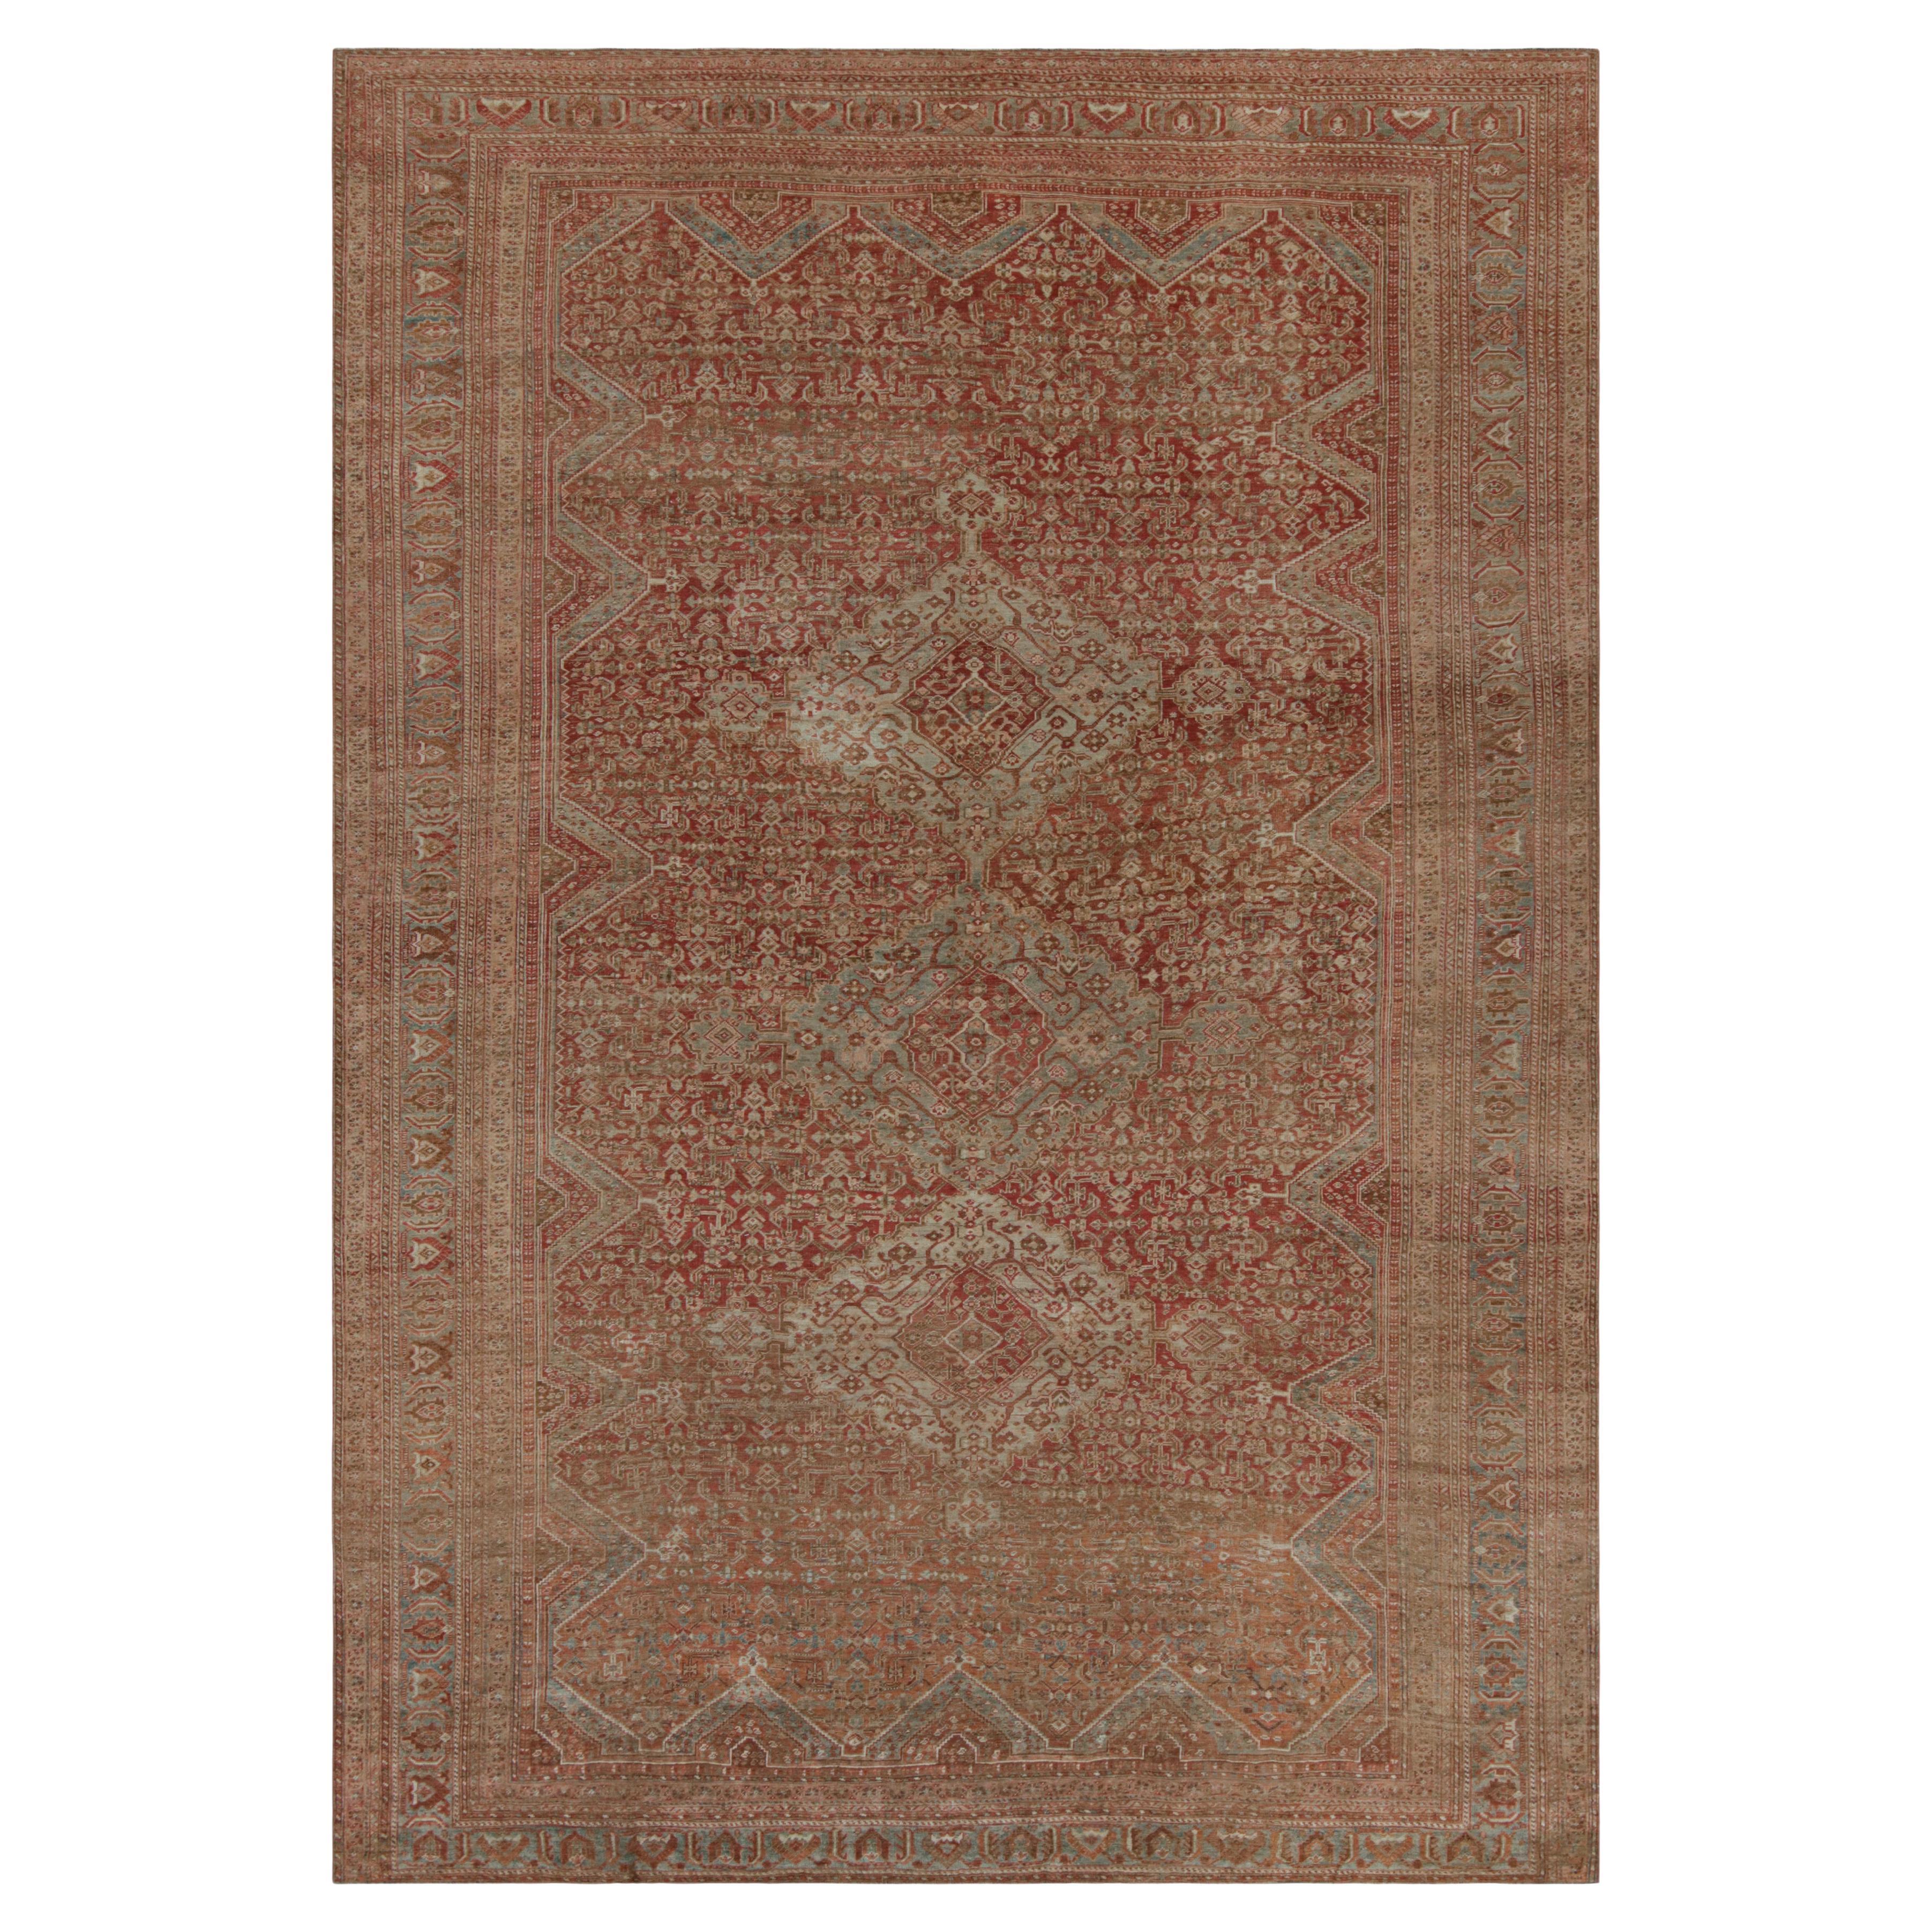 Vintage Bakhtiari-Style Rug in Red with Geometric Patterns, from Rug & Kilim